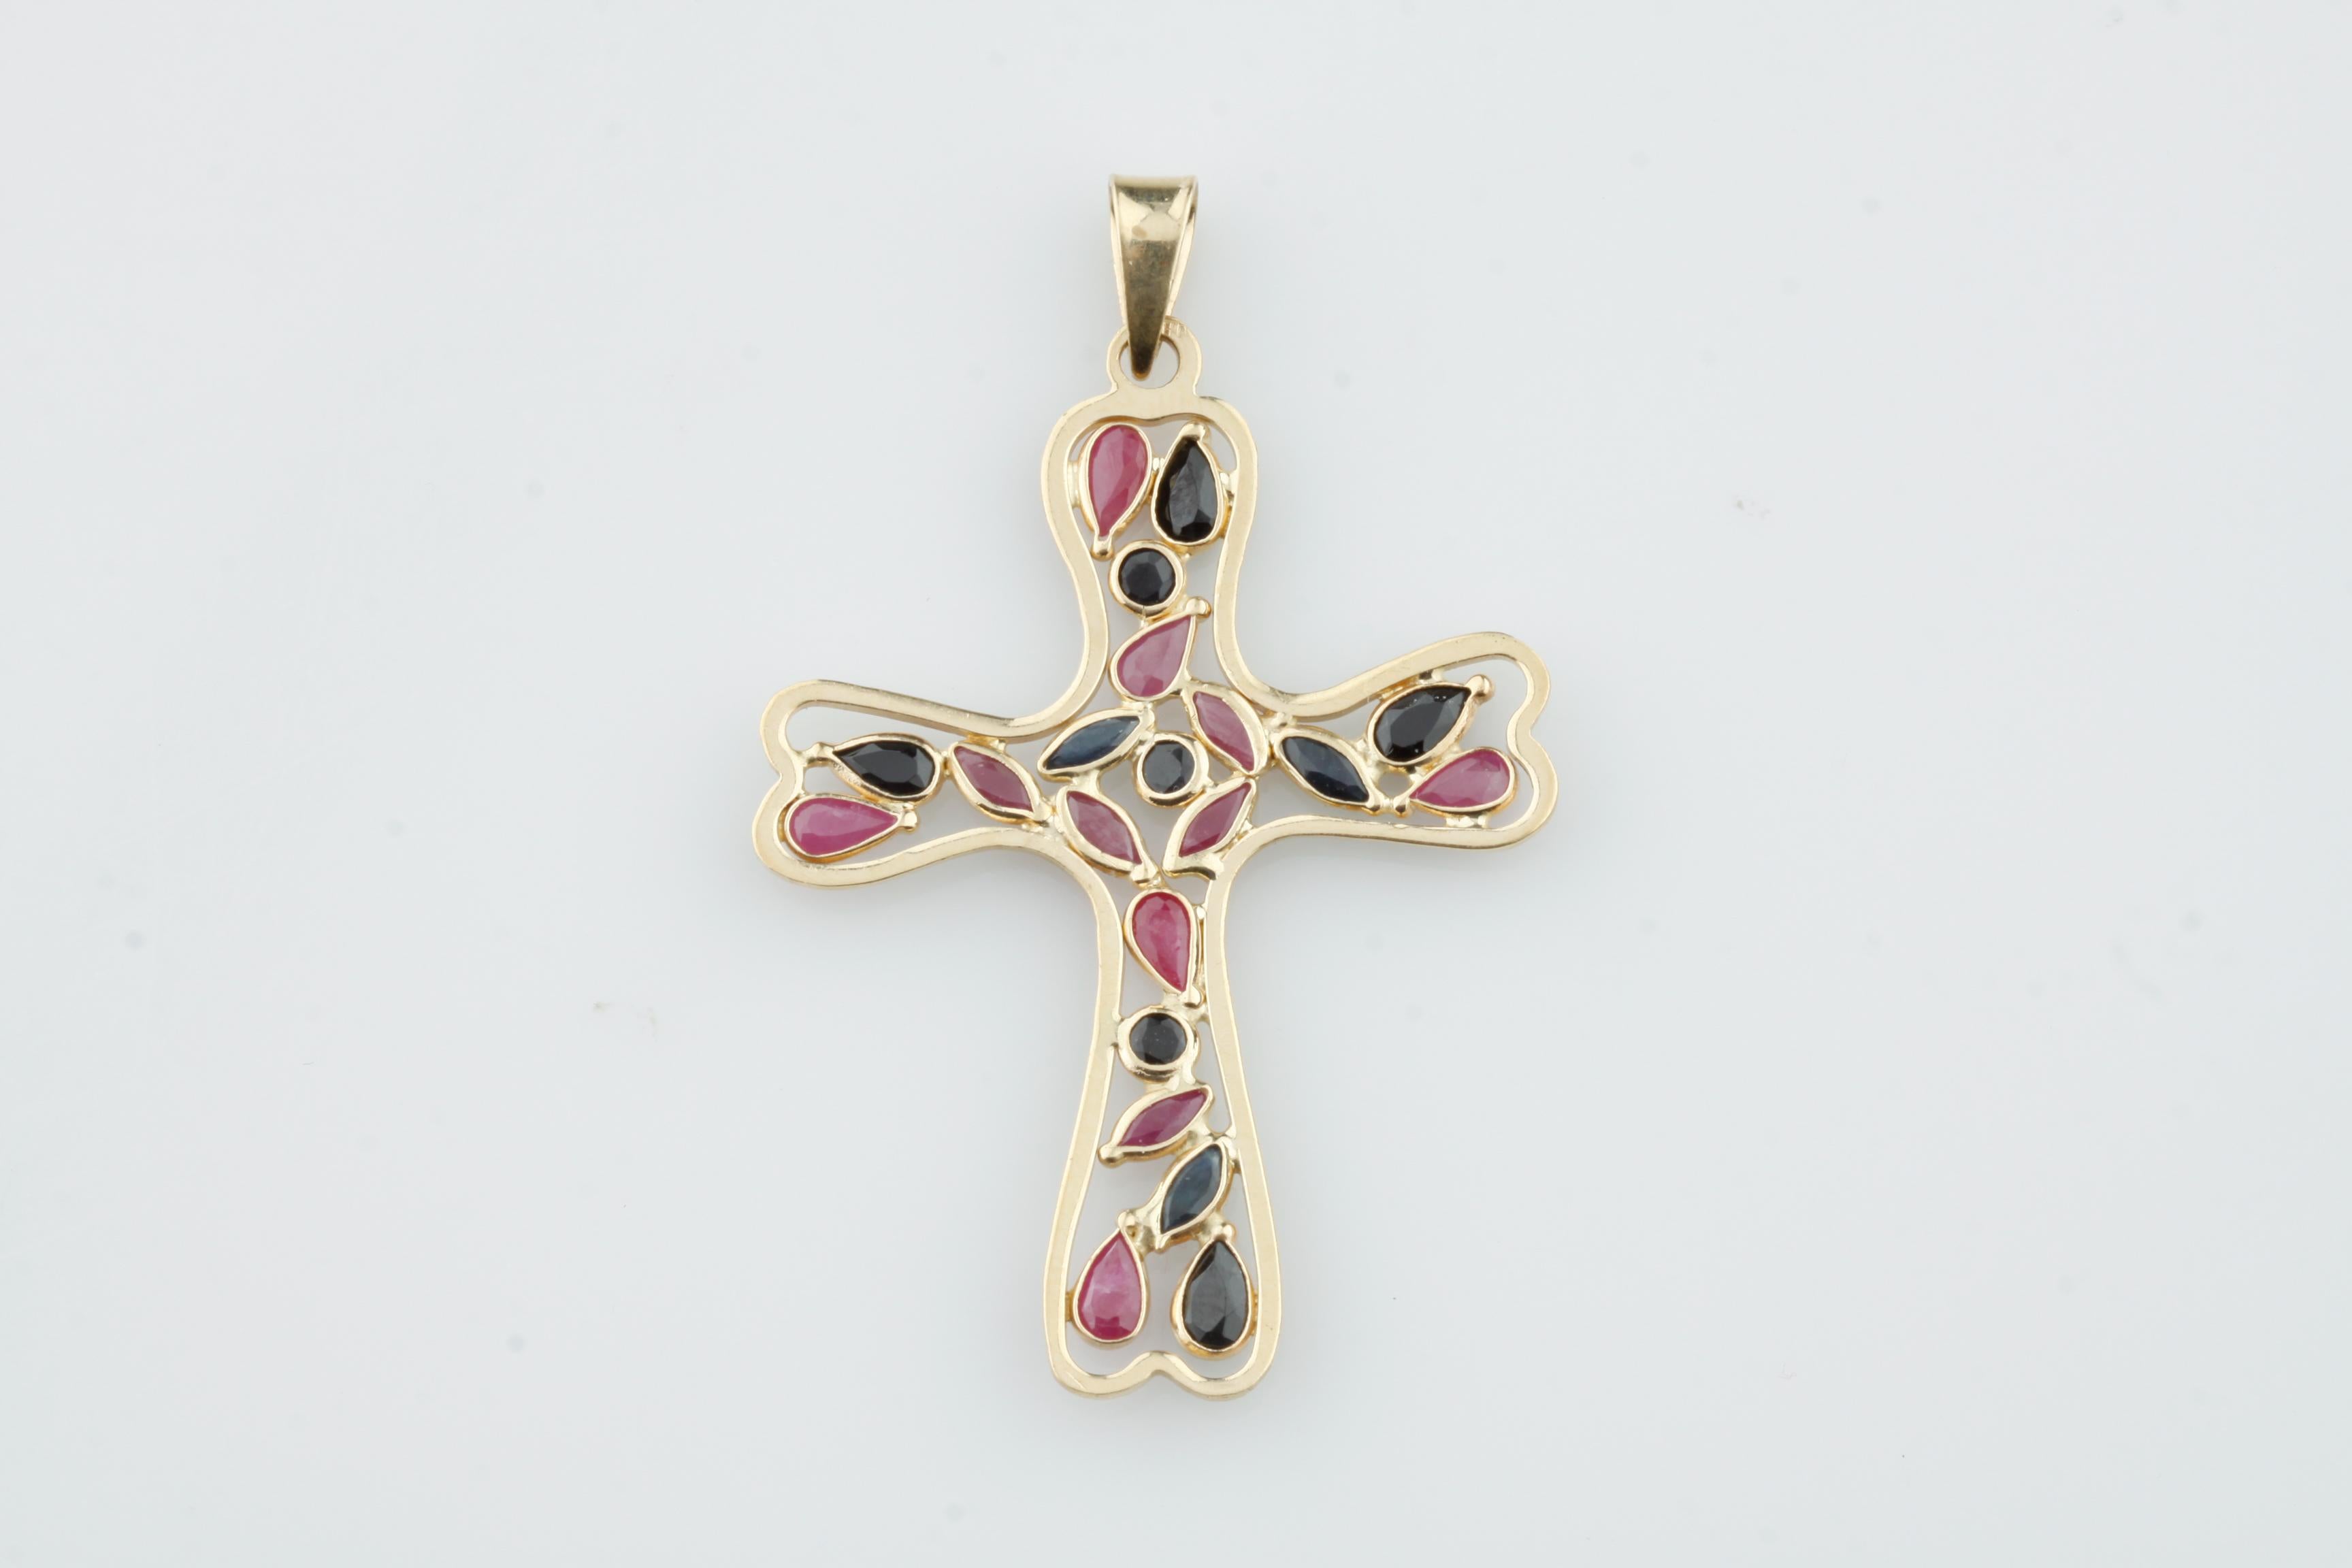 Gorgeous Organic 14k Yellow Gold Cross Pendant
Features Bezel-Set Pear, Round, and Marquise-Cut Rubies and Sapphires Suspended within Cross
Creates an almost stained-glass appearance
Total Length of Cross (Including Bail) = 54 mm
Width of Cross = 36